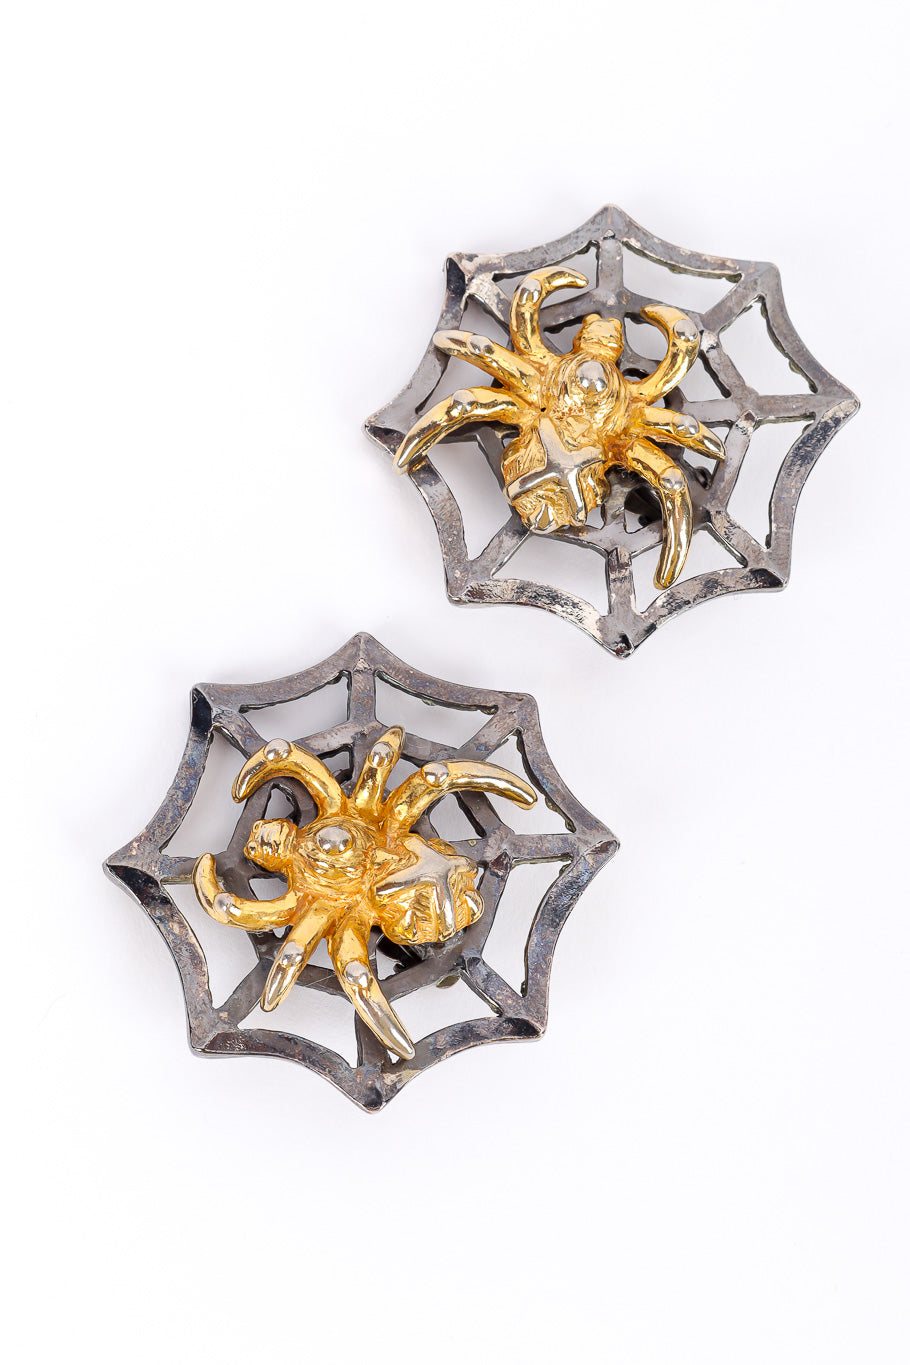 Spider earrings by Lorenz Paris on white background @recessla